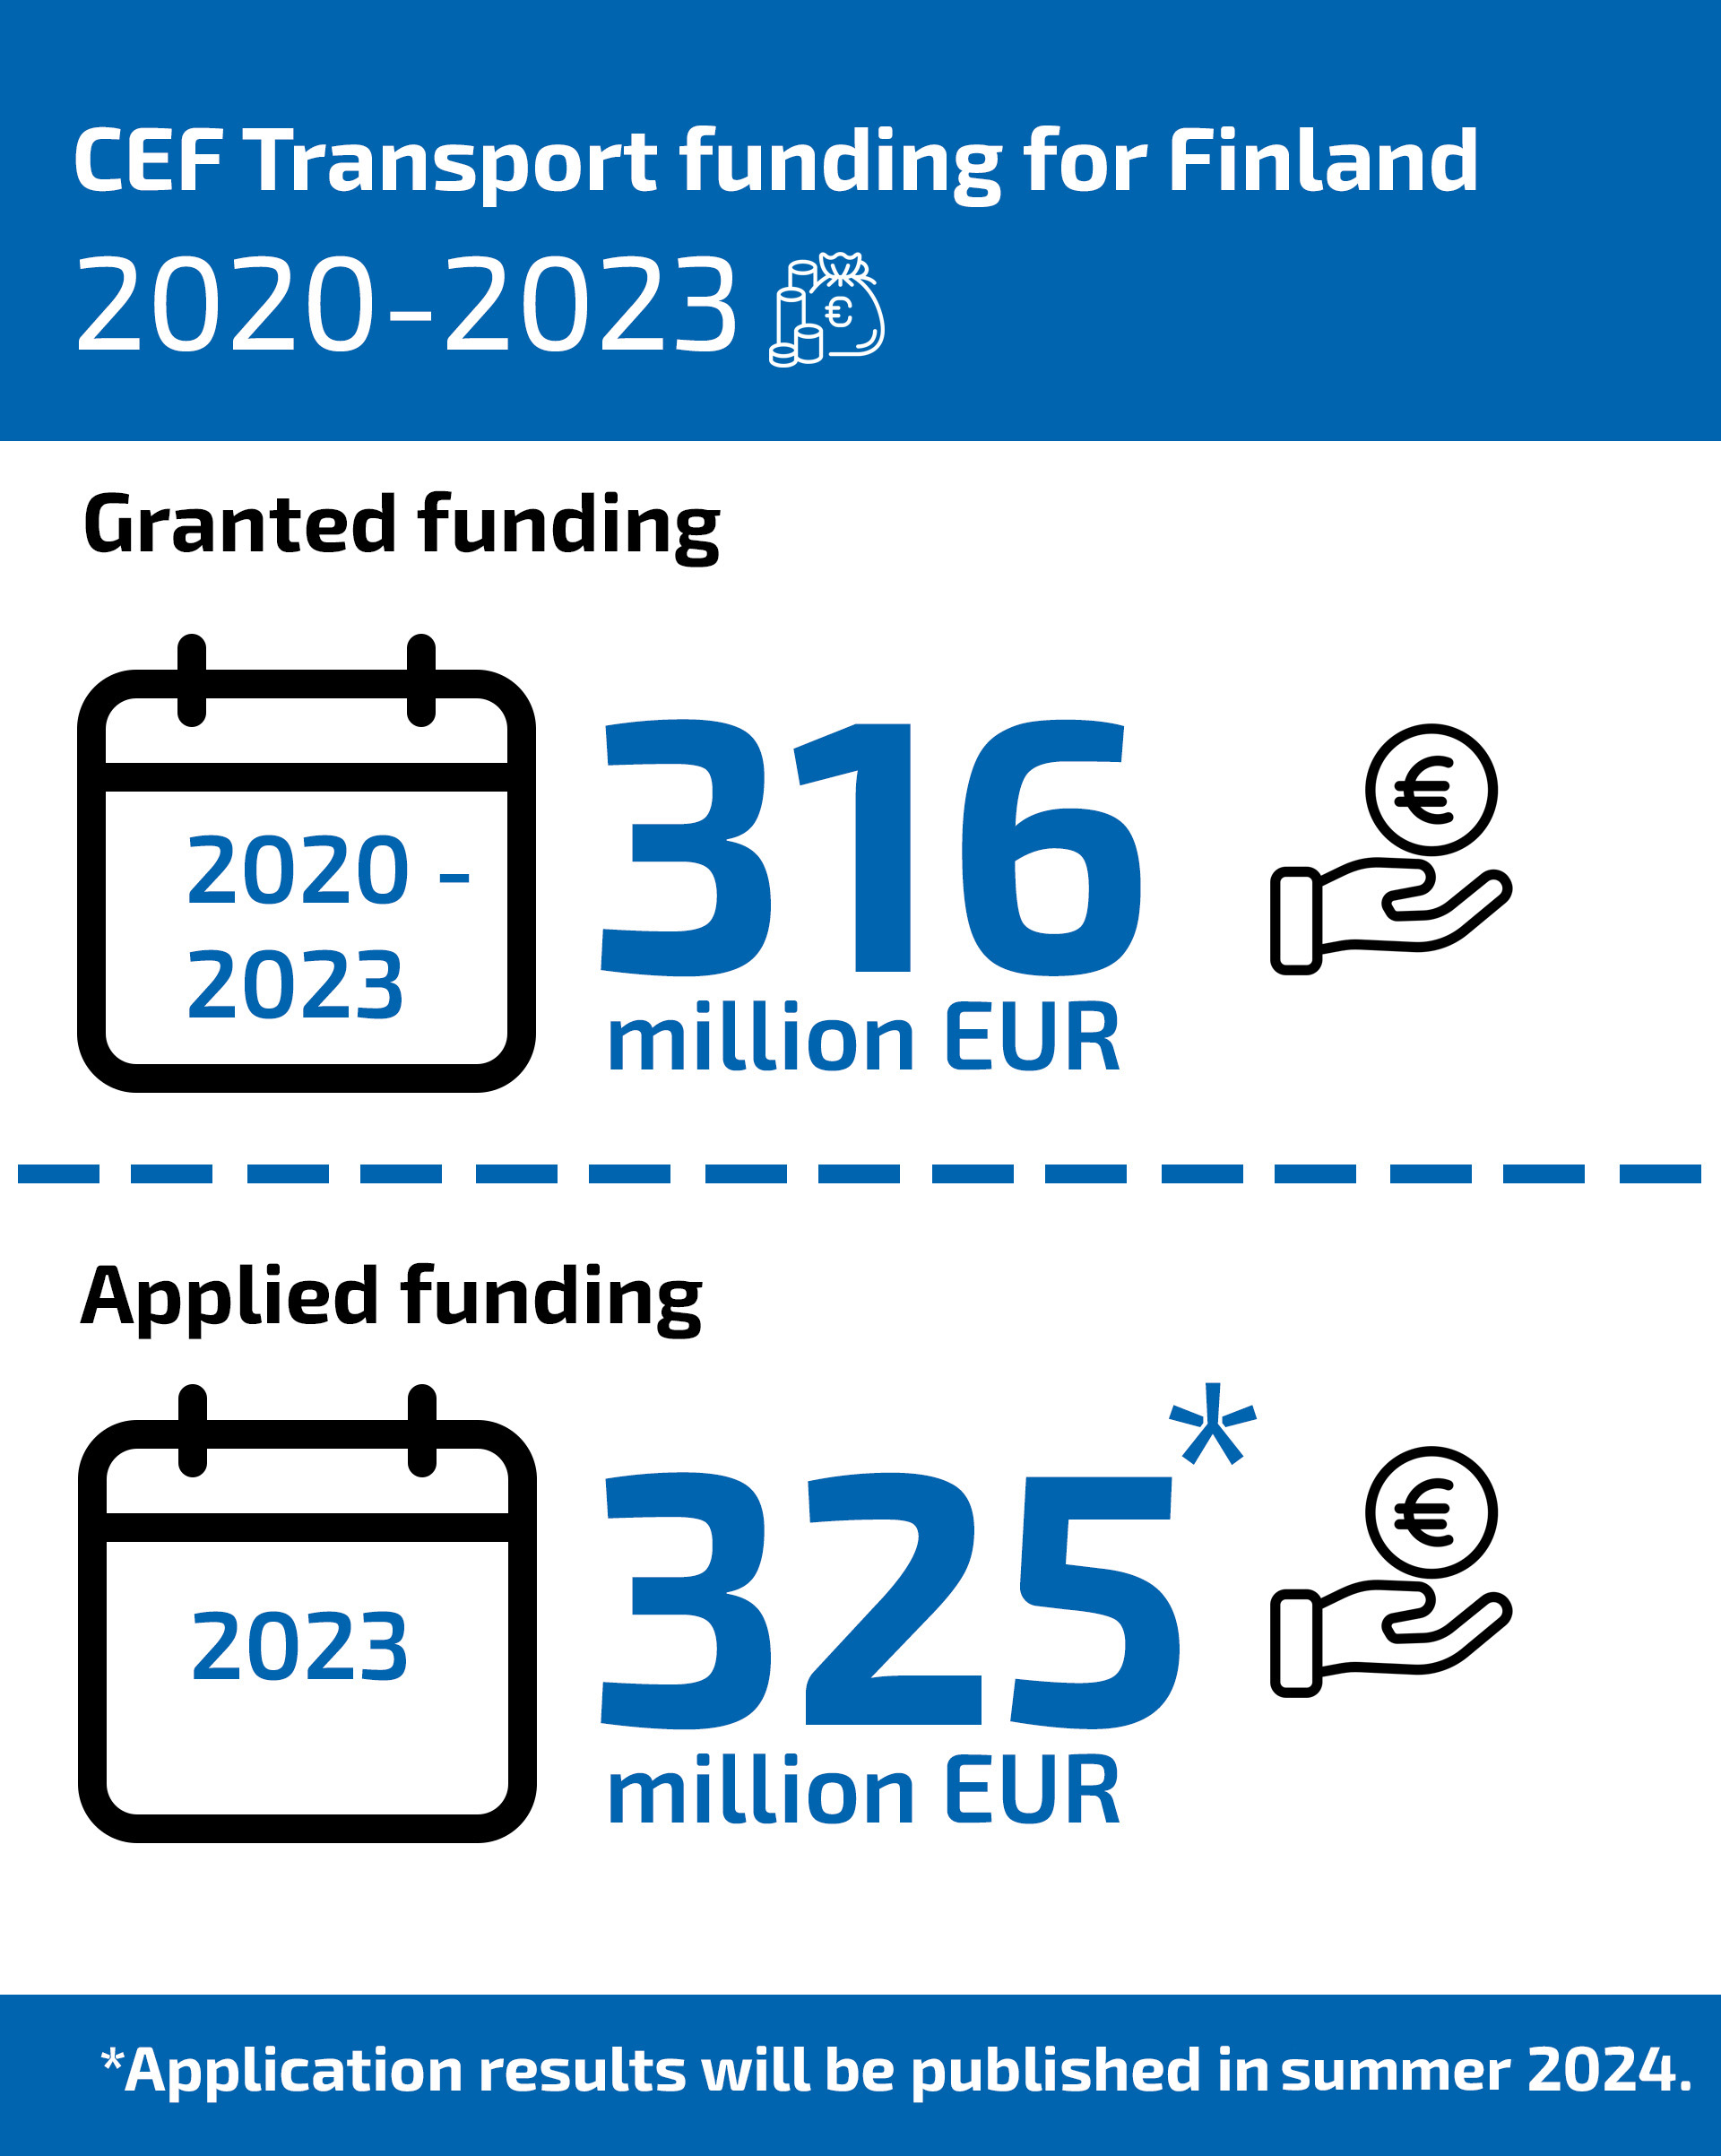 Infographiv about CEF transport funding for Finland 2020-2023.